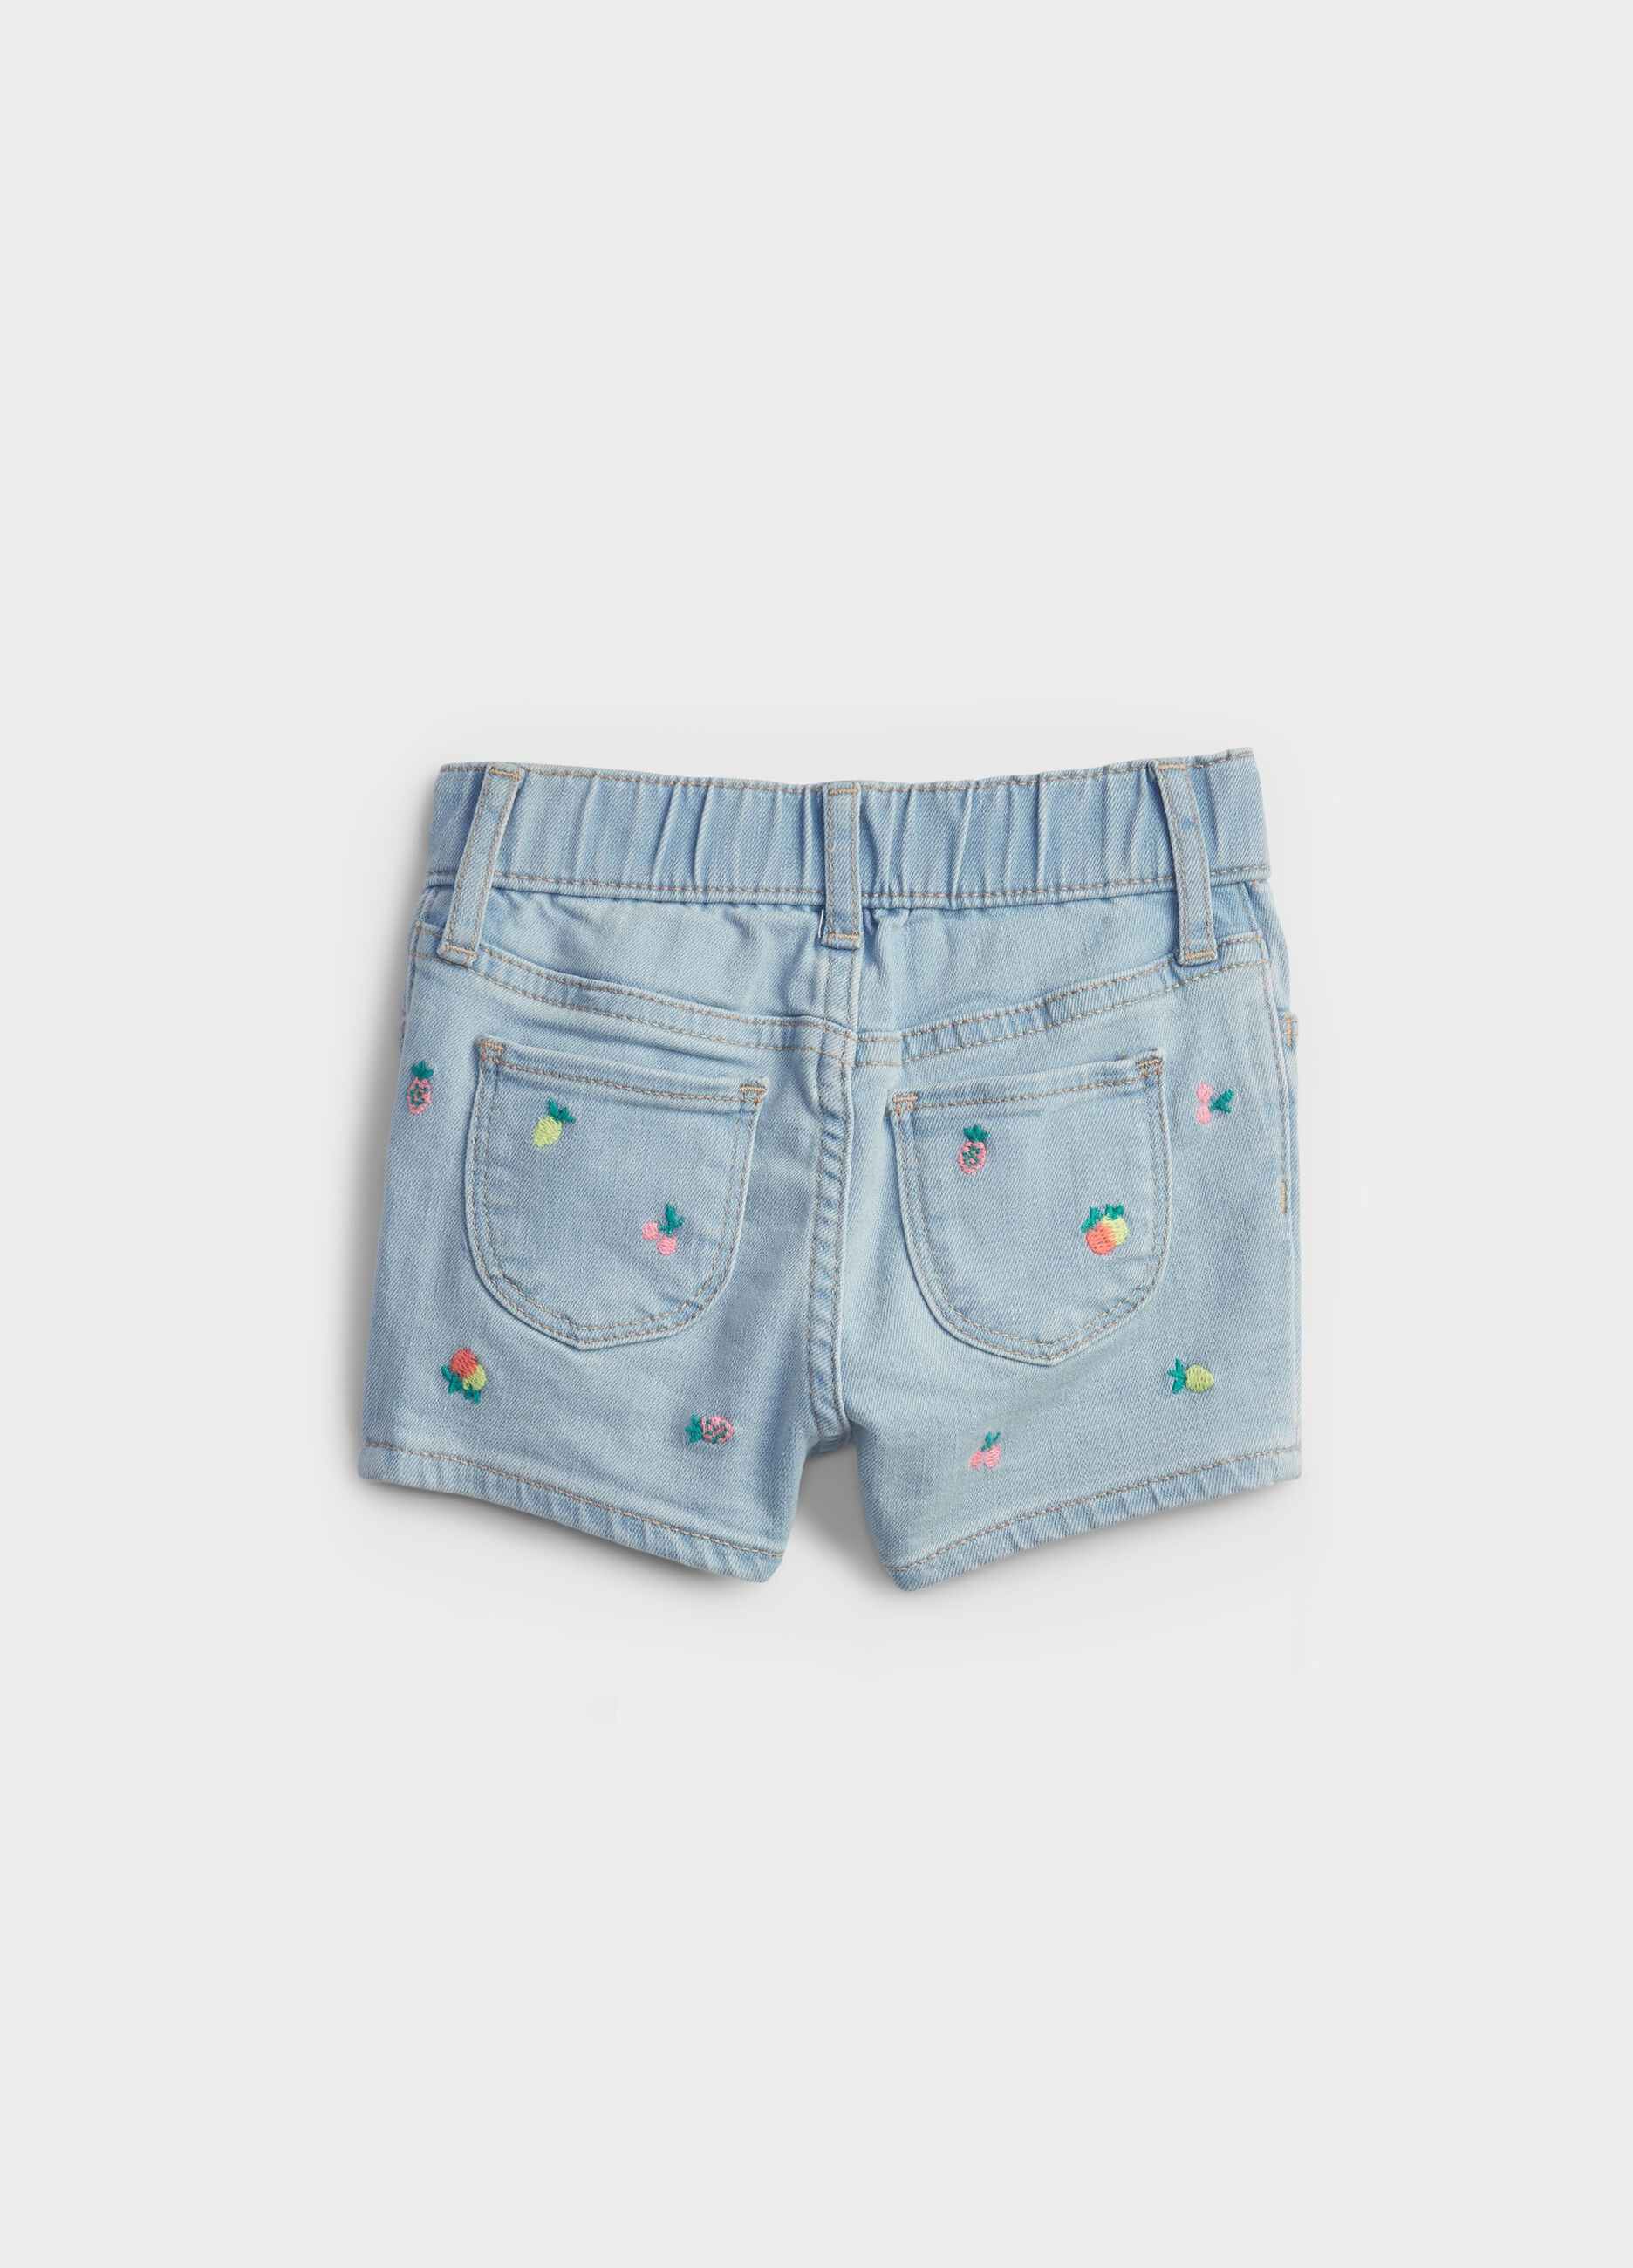 Denim shorts with all-over embroidery